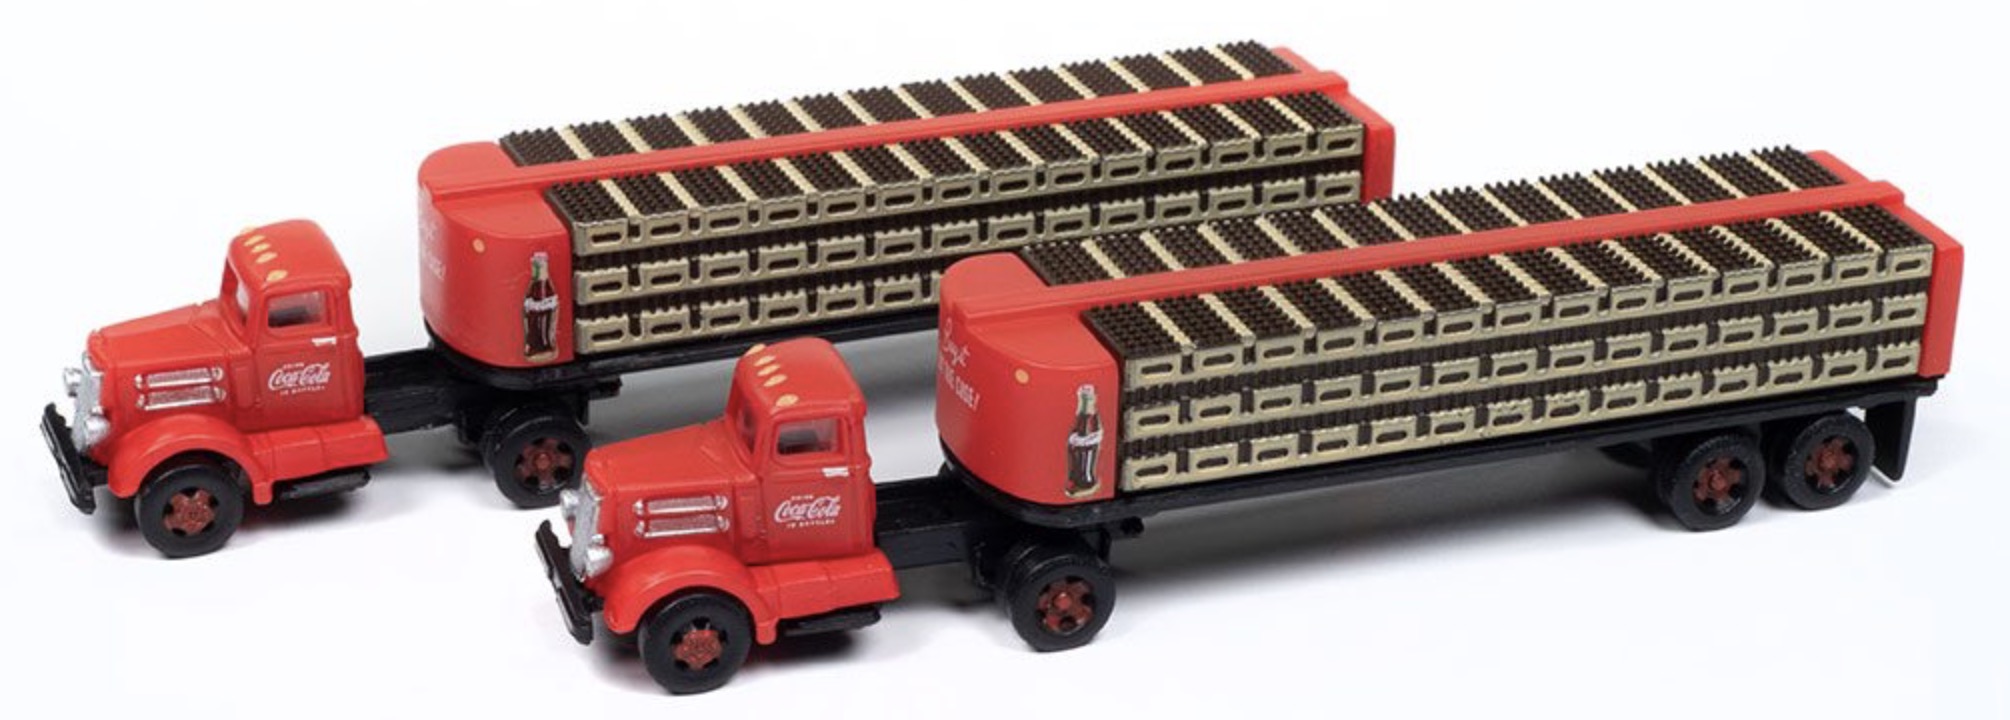 N Scale - Classic Metal Works - 51207 - Truck, IH R190 - Coca-Cola - 1954 IH R-190 Tractor with Flatbed